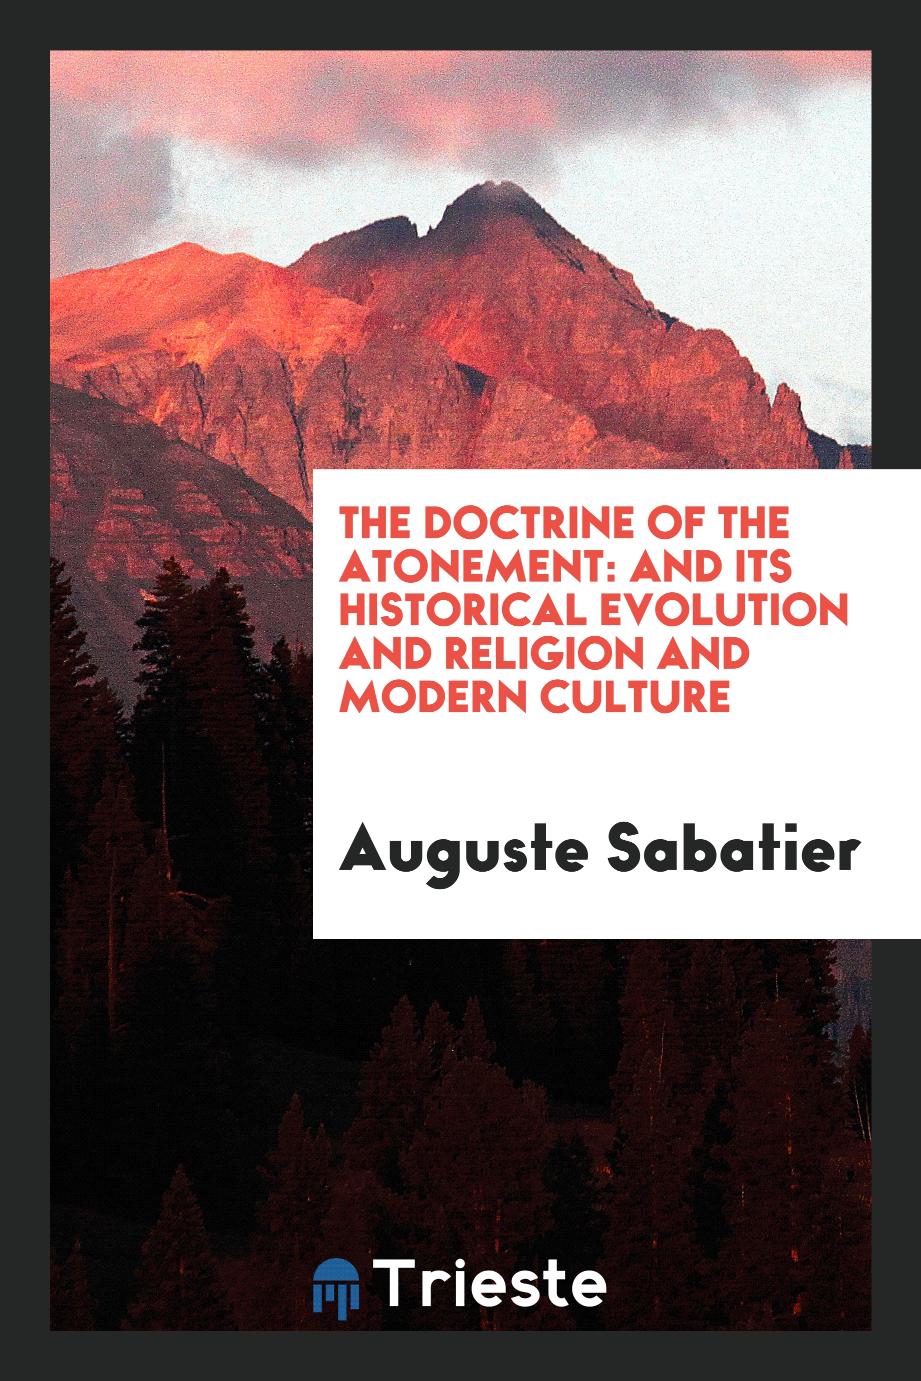 The doctrine of the atonement: and its historical evolution and religion and modern culture